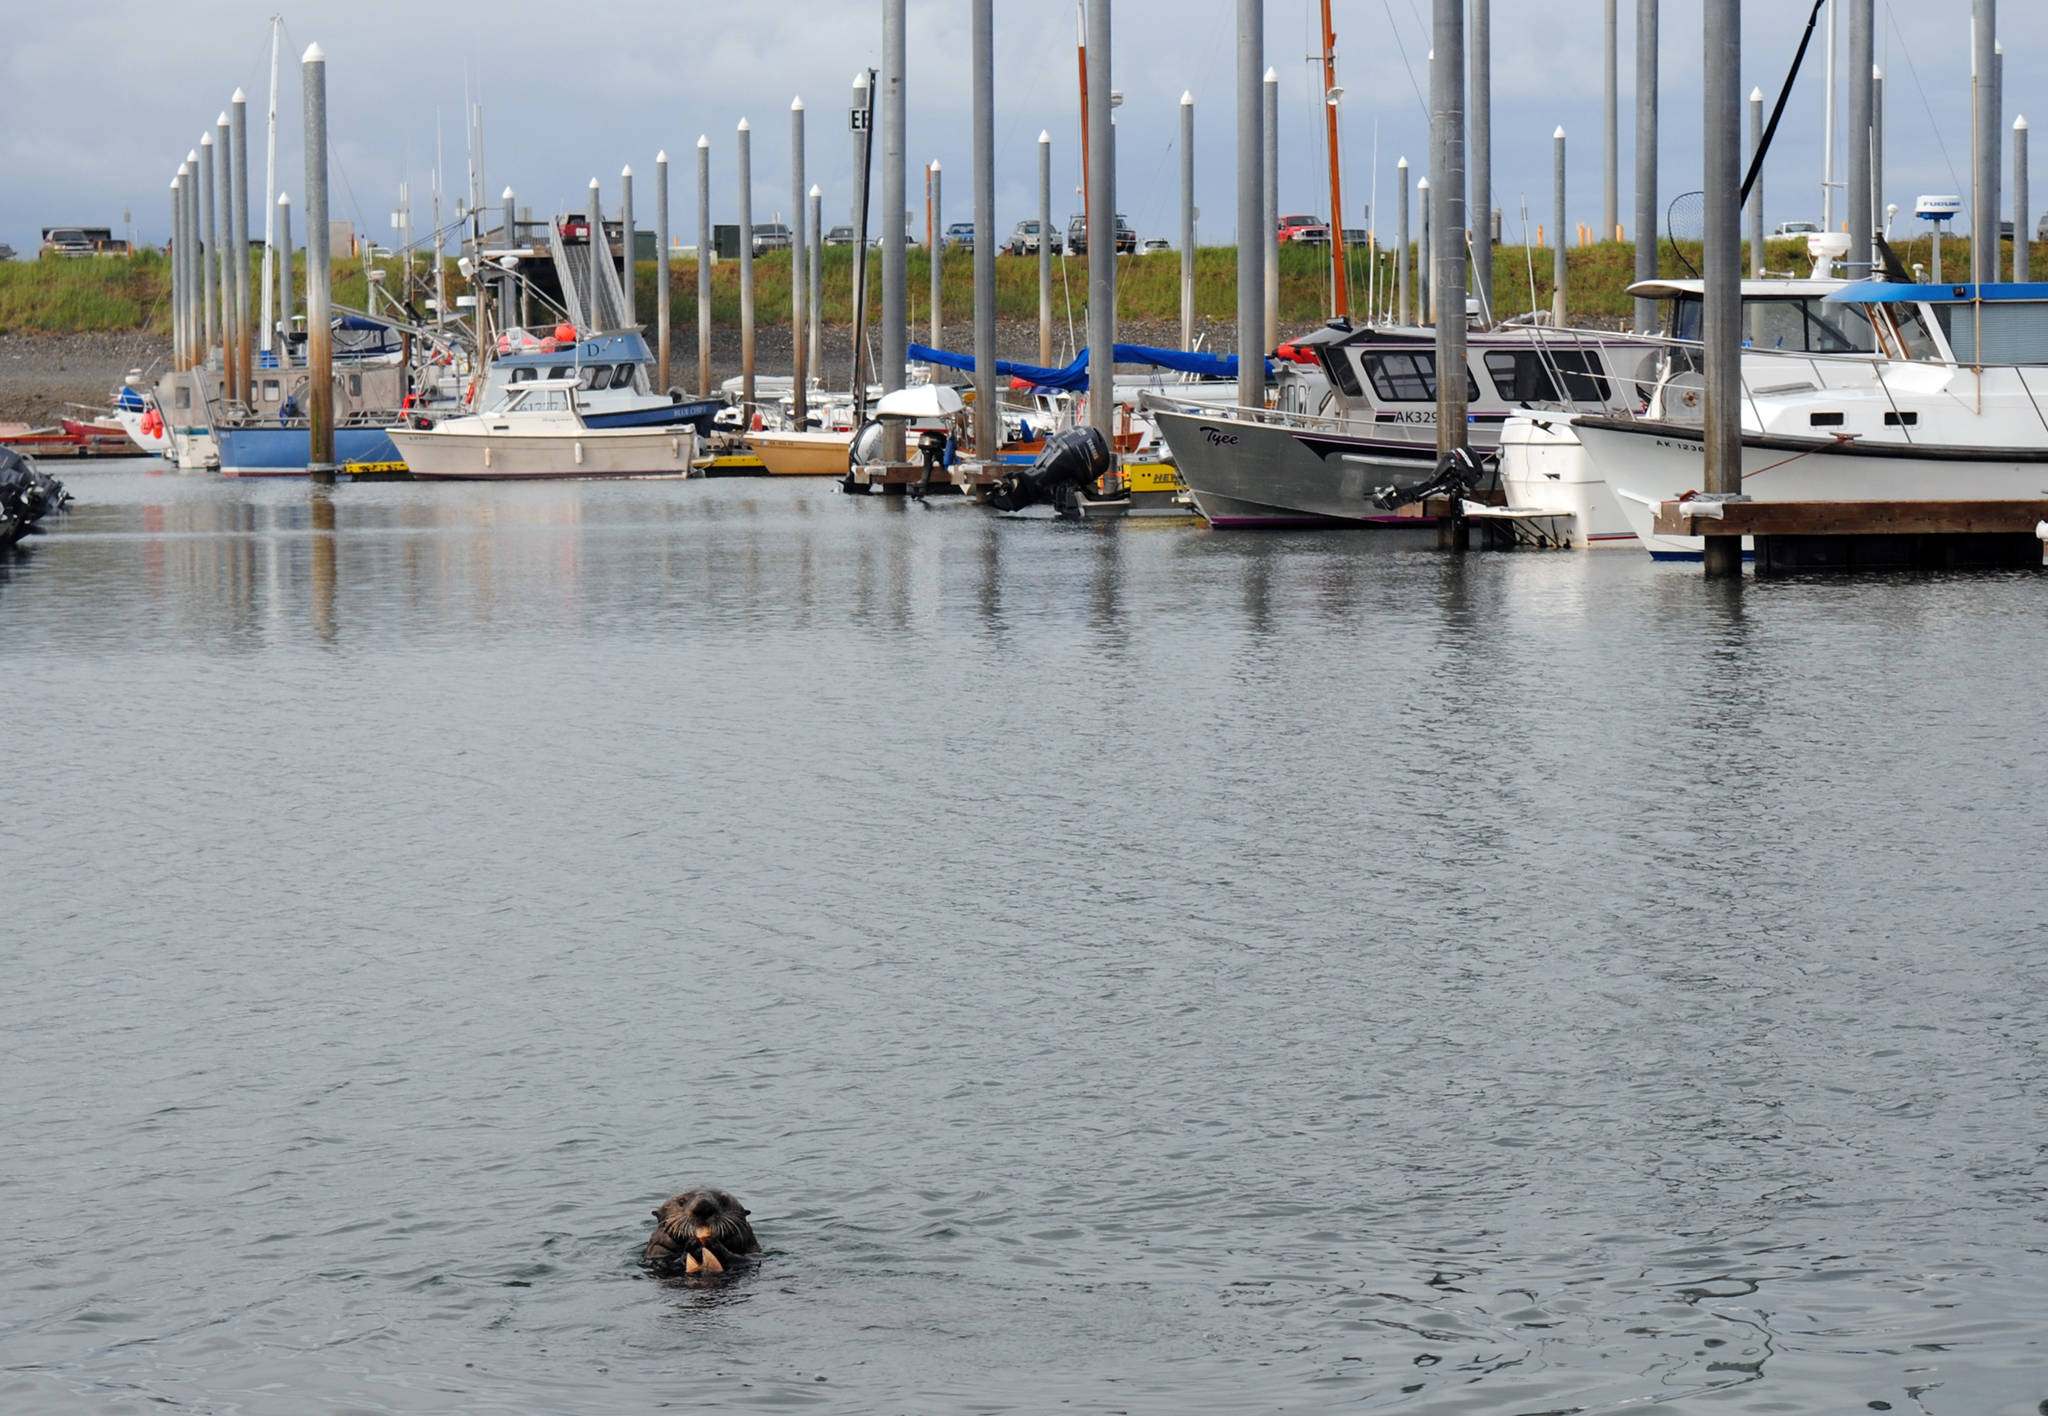 An otter swims while eating a clam in Homer Harbor Tuesday, June 20, 2017 in Homer, Alaska. (Photo by Kat Sorensen/Peninsula Clarion)